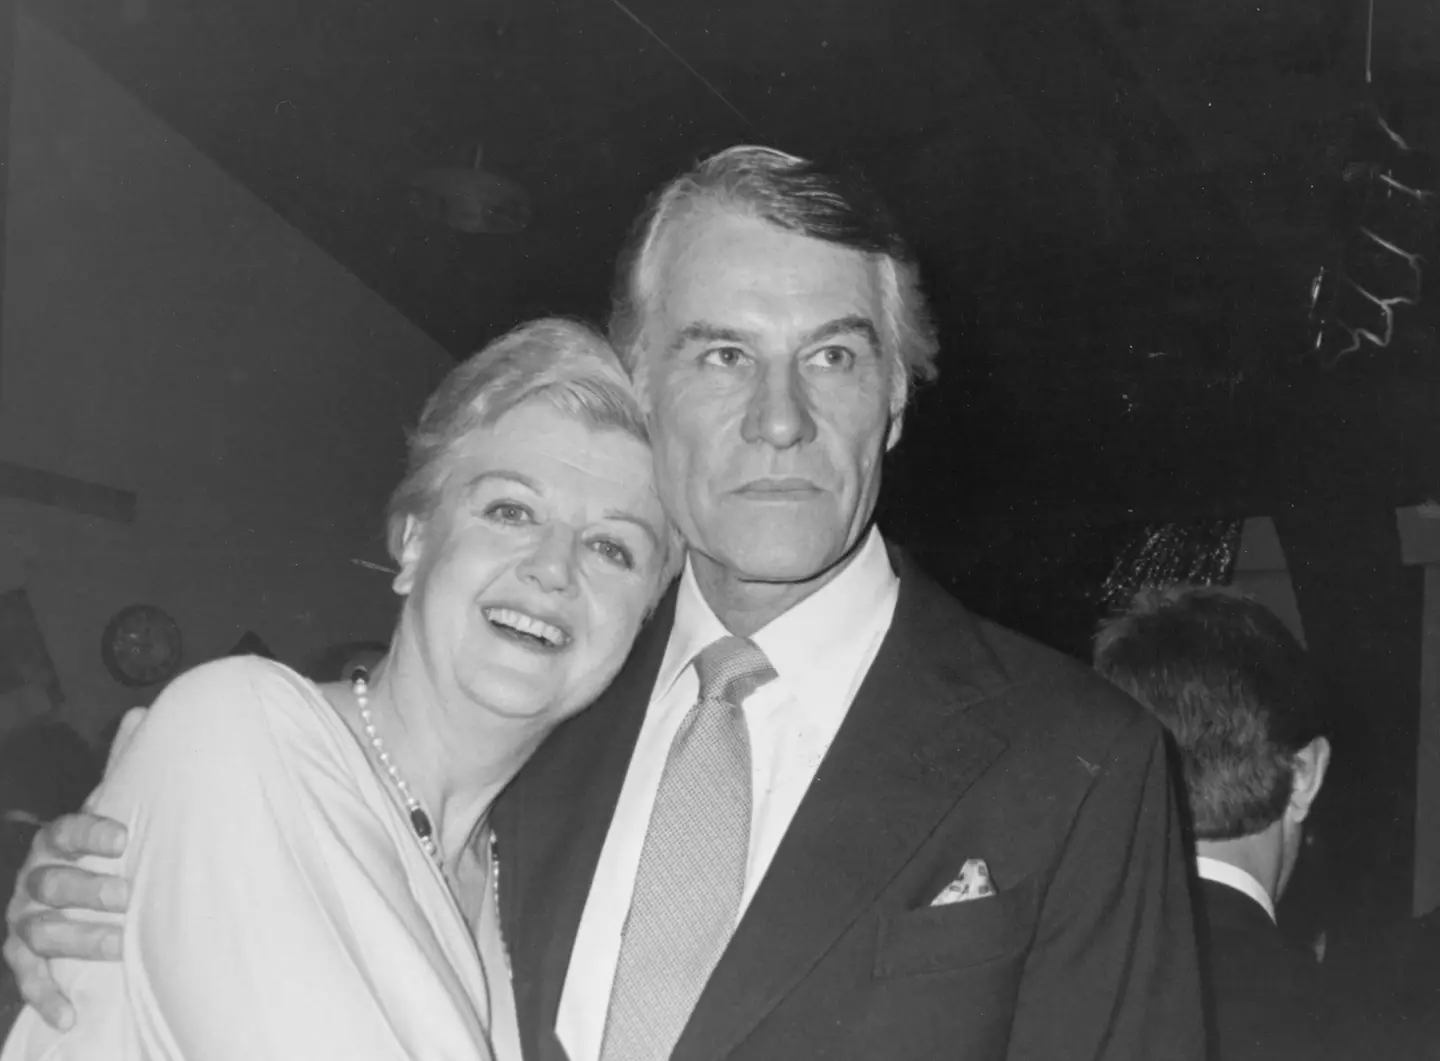 Lansbury was proceeded in her death by her husband Peter Shaw.